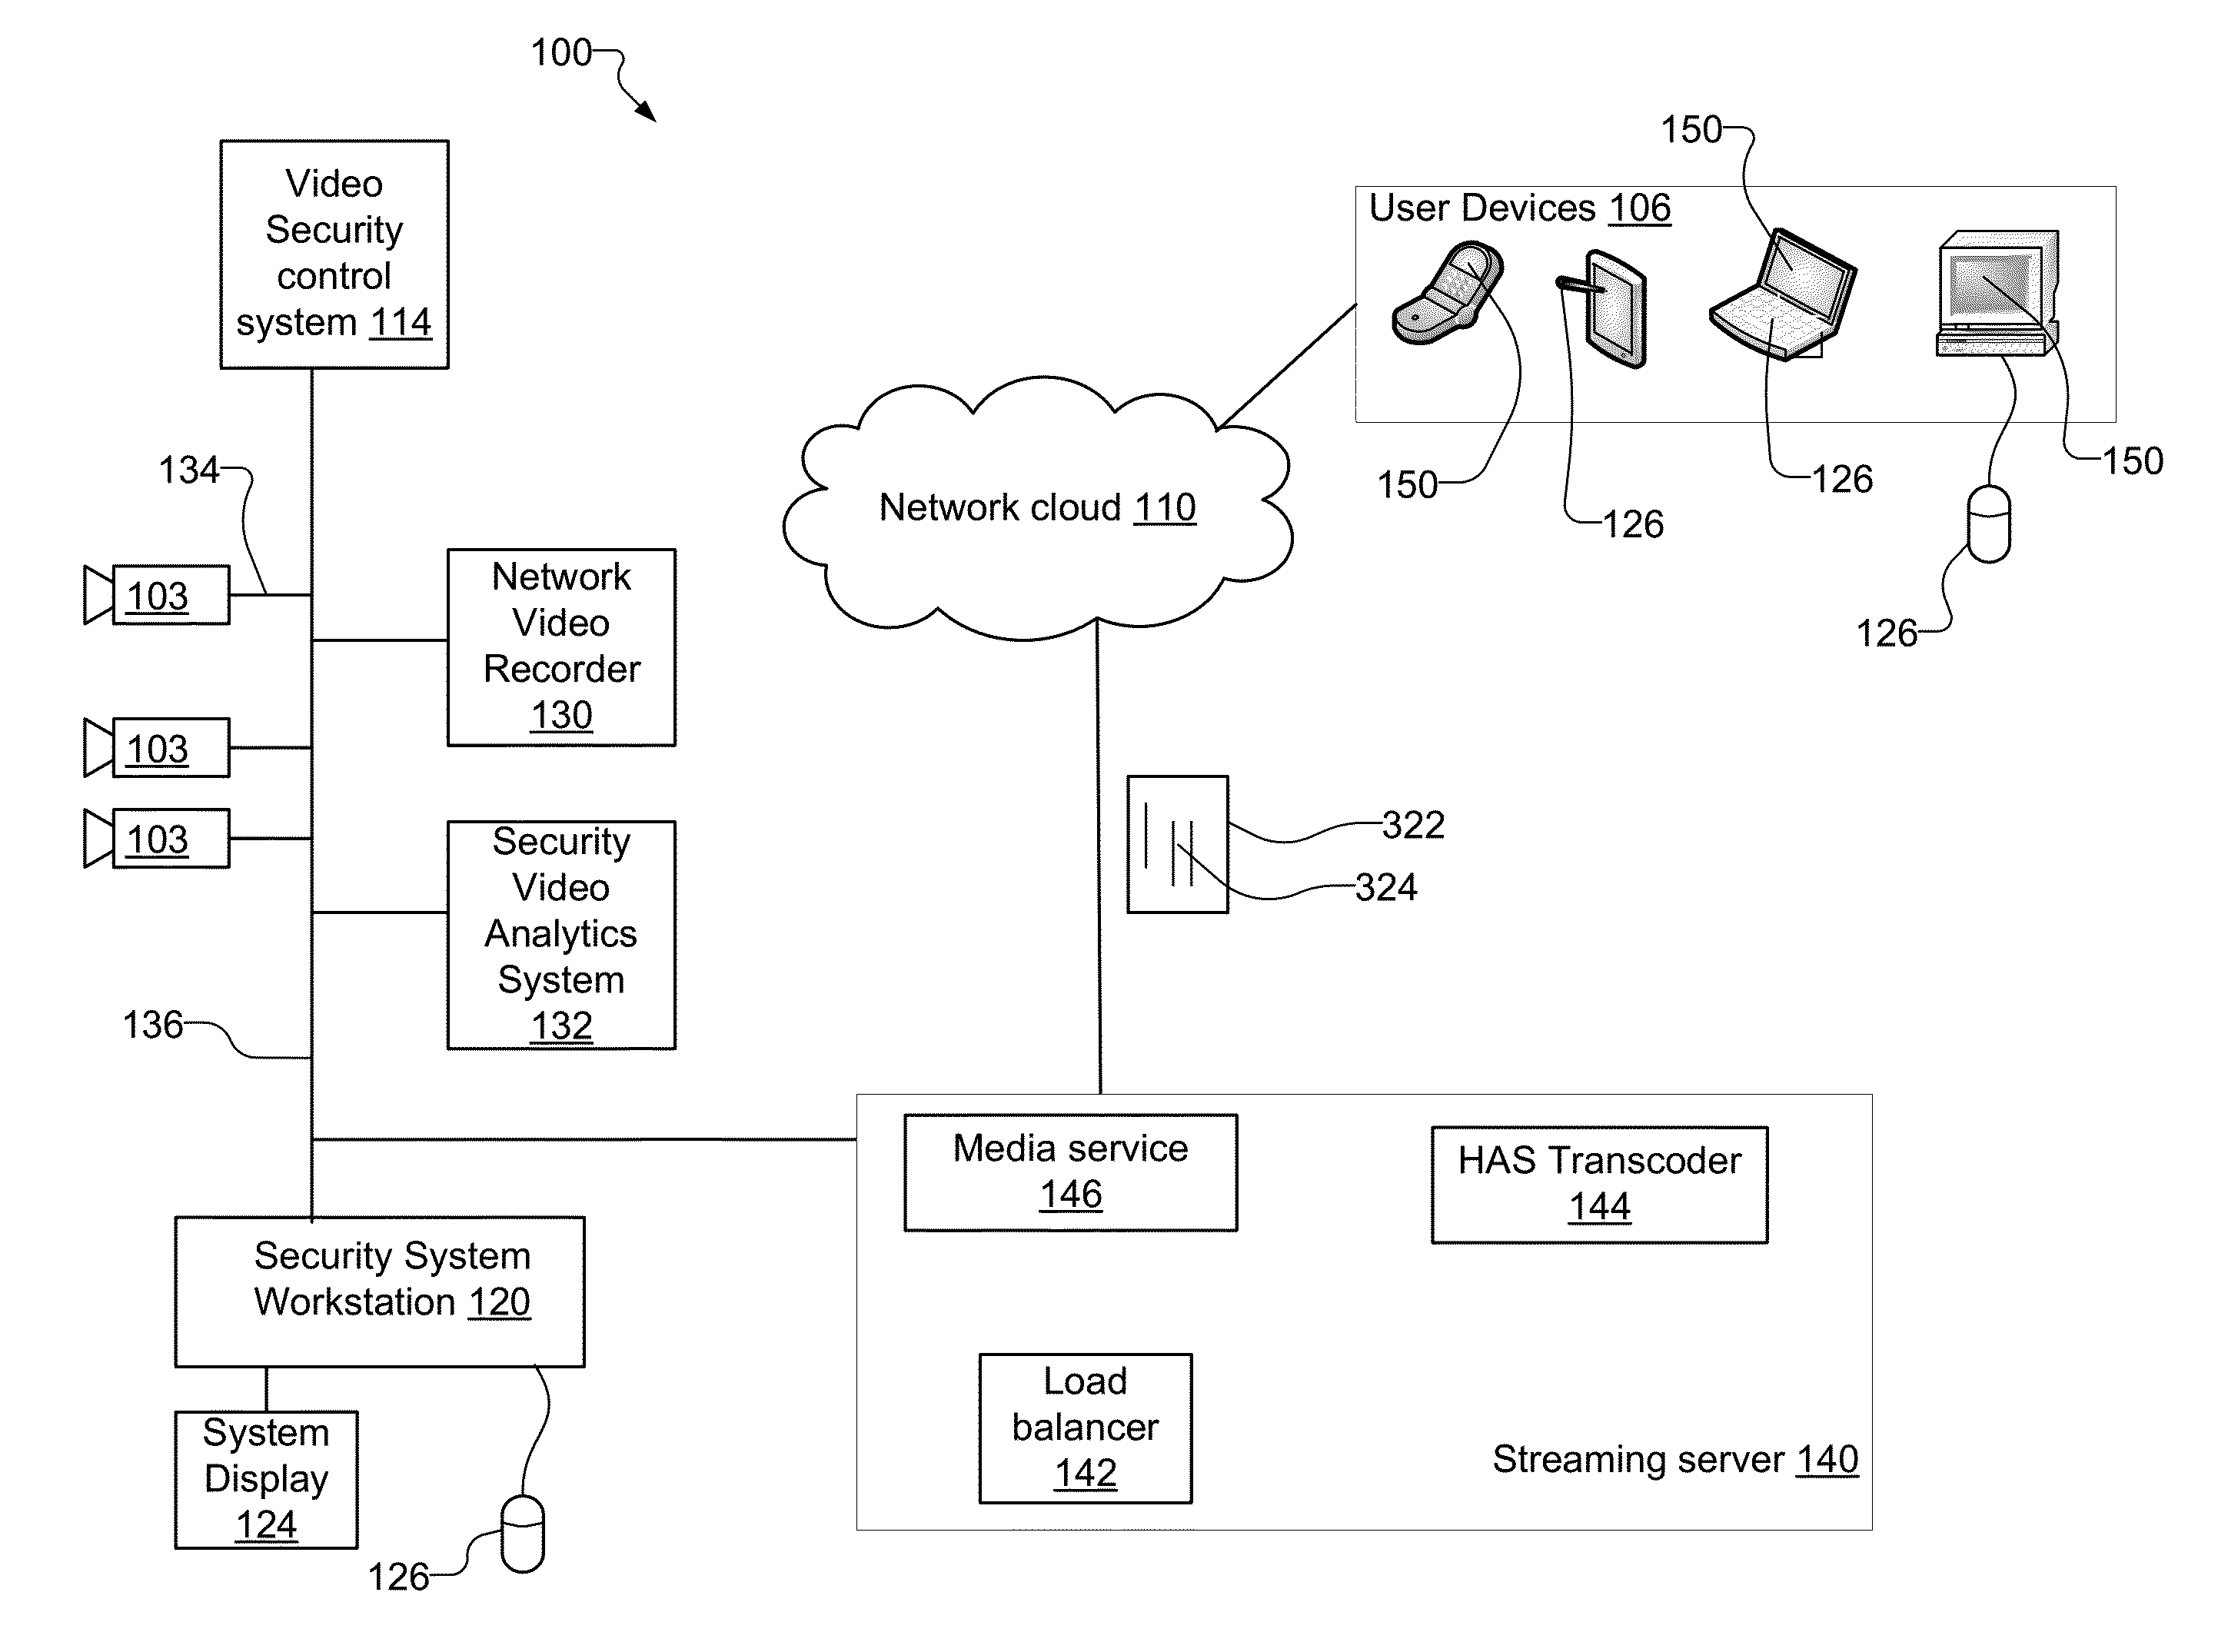 Selection and Display of Adaptive Rate Streams in Video Security System